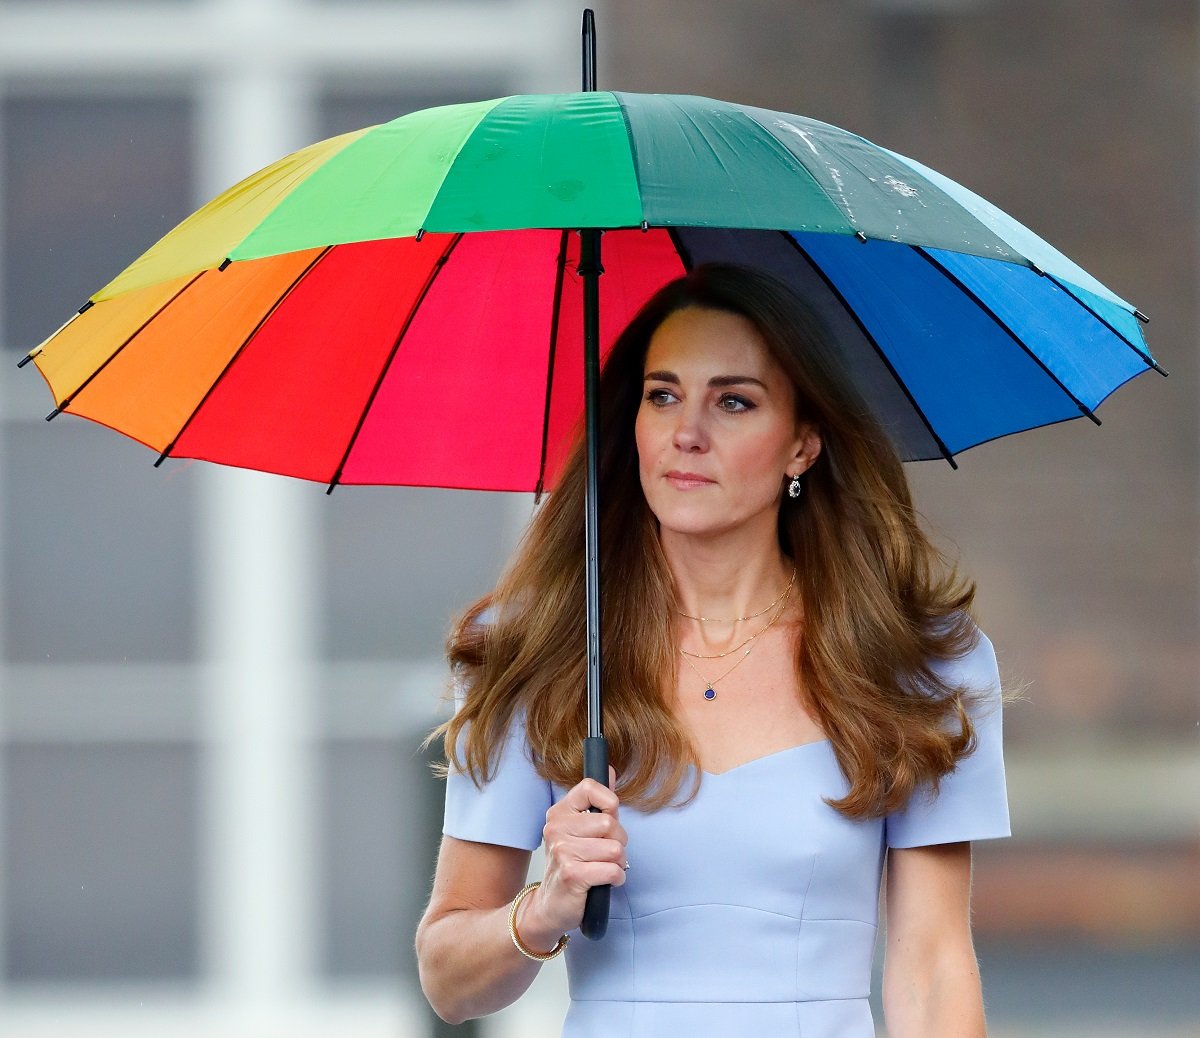 Kate Middleton, whose body language at Wimbledon in the rain was analyzed, attends the launch of The Royal Foundation Centre for Early Childhood at Kensington Palace